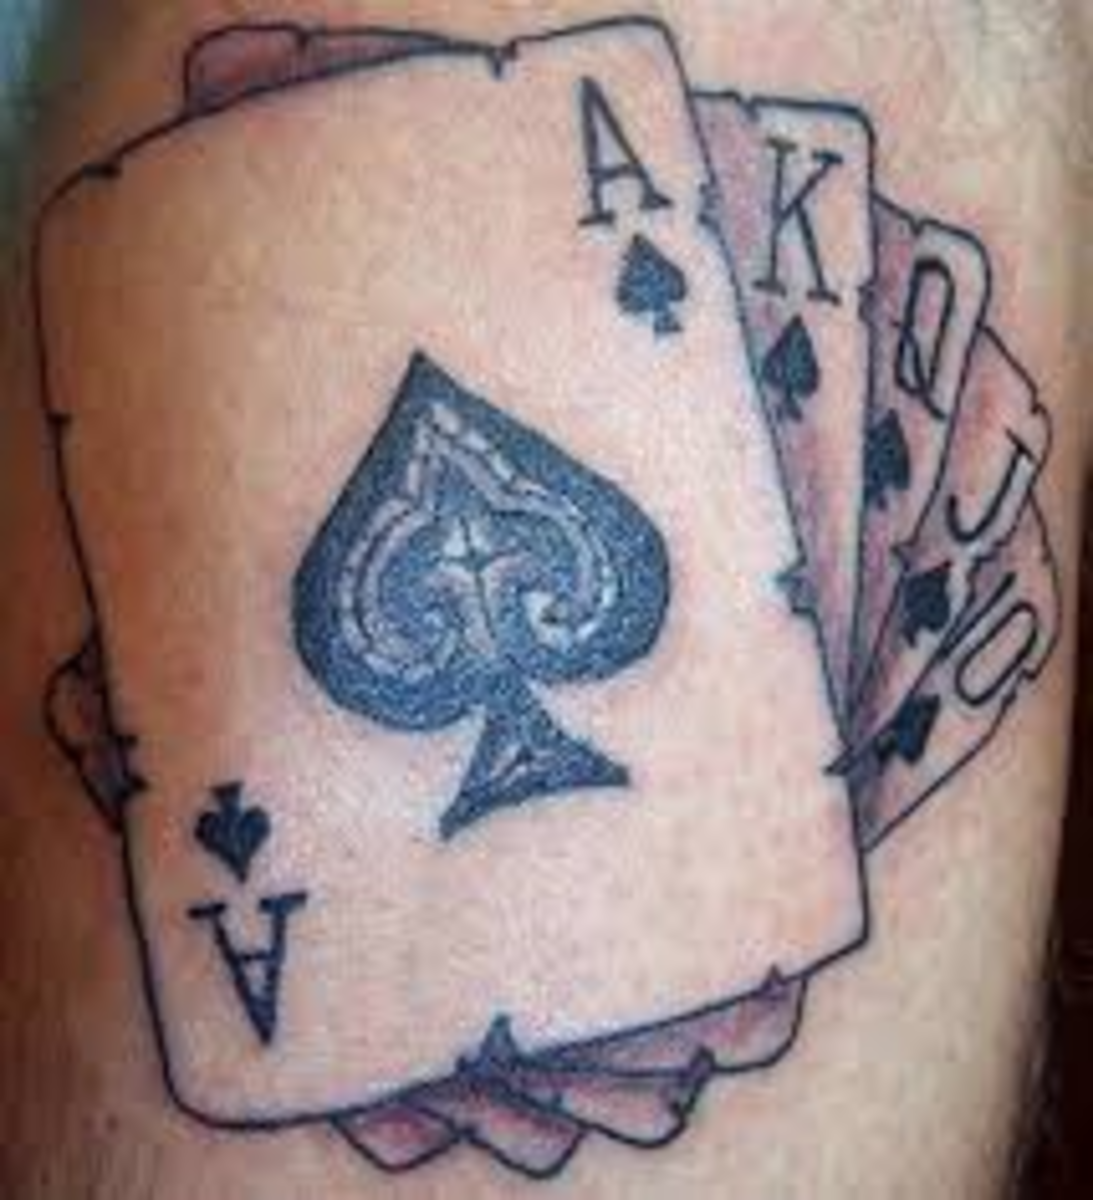 Ace of Spades Tattoos: Designs, Ideas, and Meanings.